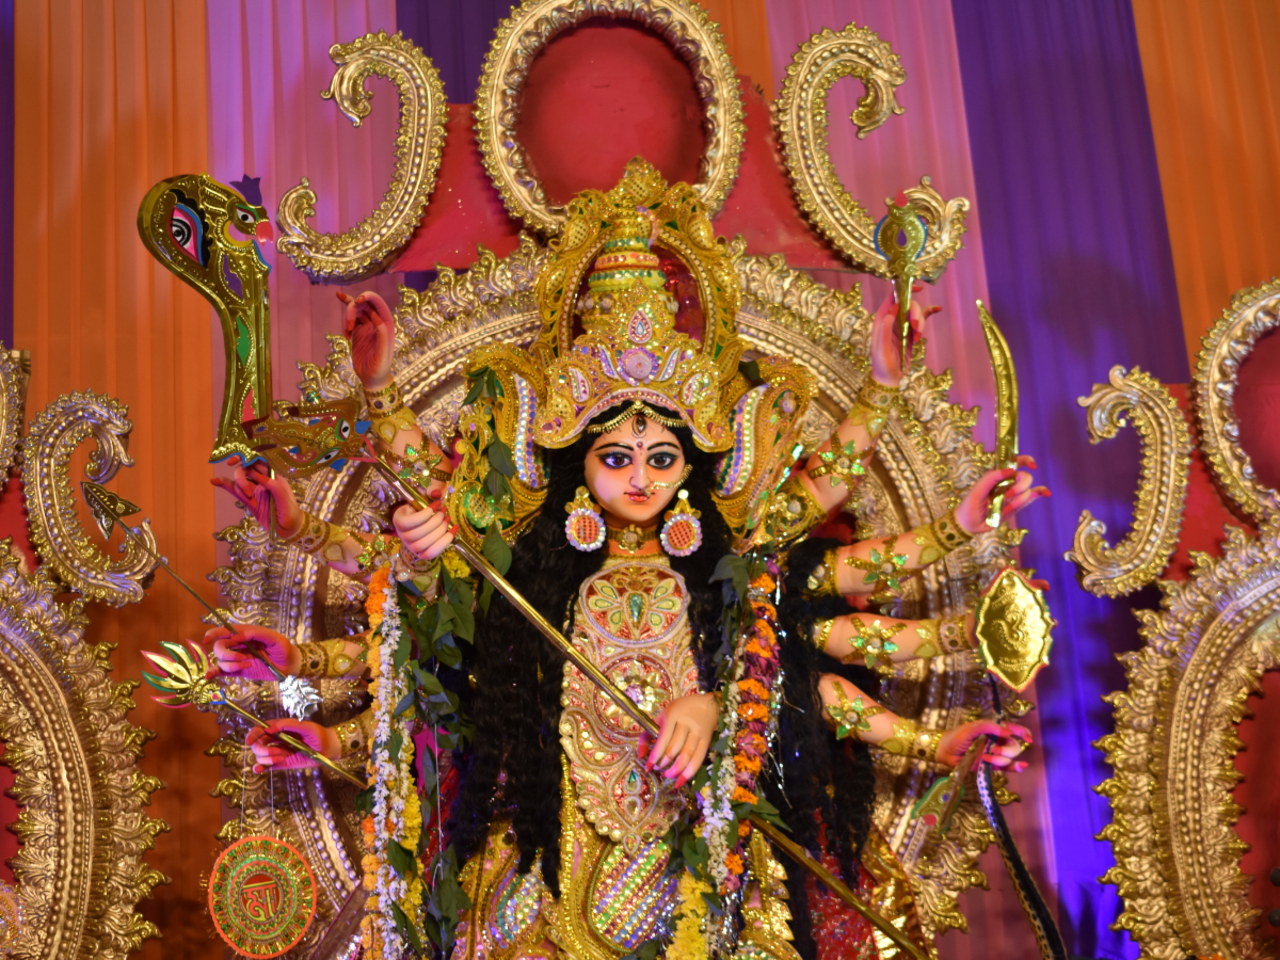 Goddess Durga Idol At Decorated Durga Puja Pandal, Shot At Colored Light,  In Kolkata, West Bengal, India. Durga Puja Is Biggest Religious Festival Of  Hinduism And Is Now Celebrated Worldwide. Stock Photo,